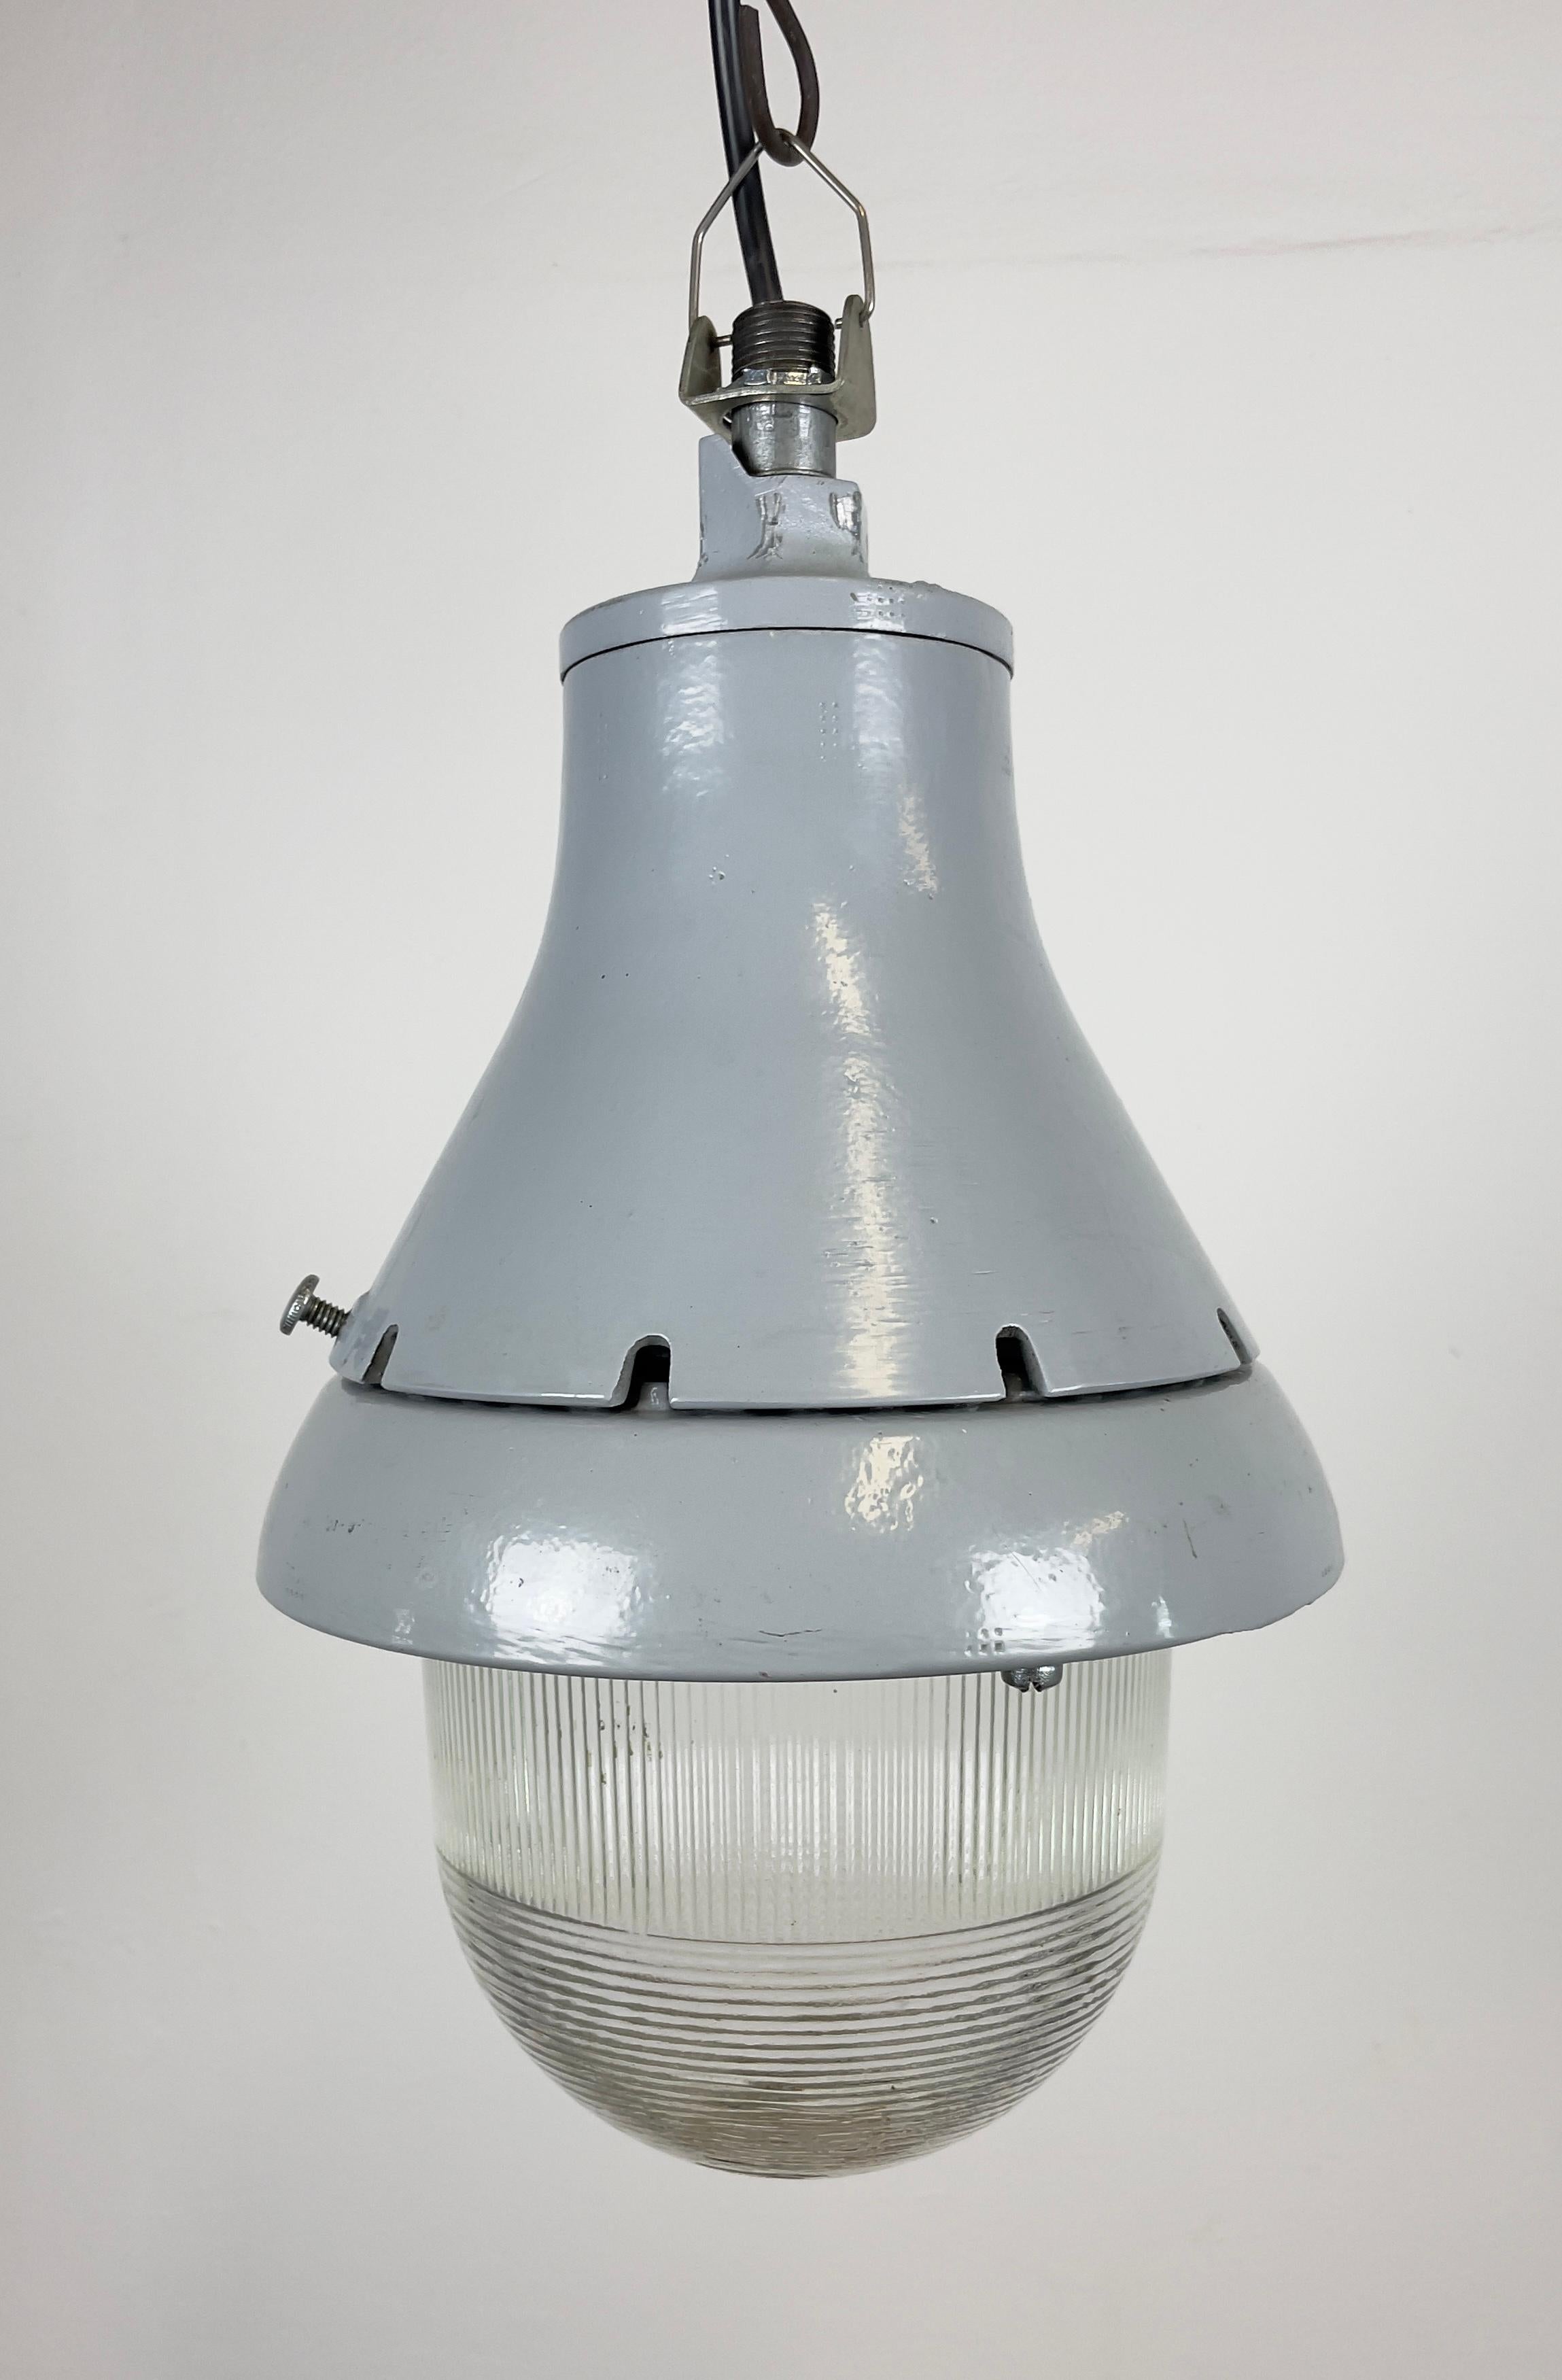 Grey Industrial Explosion Proof Light from Crouse-Hinds, 1970s For Sale 2